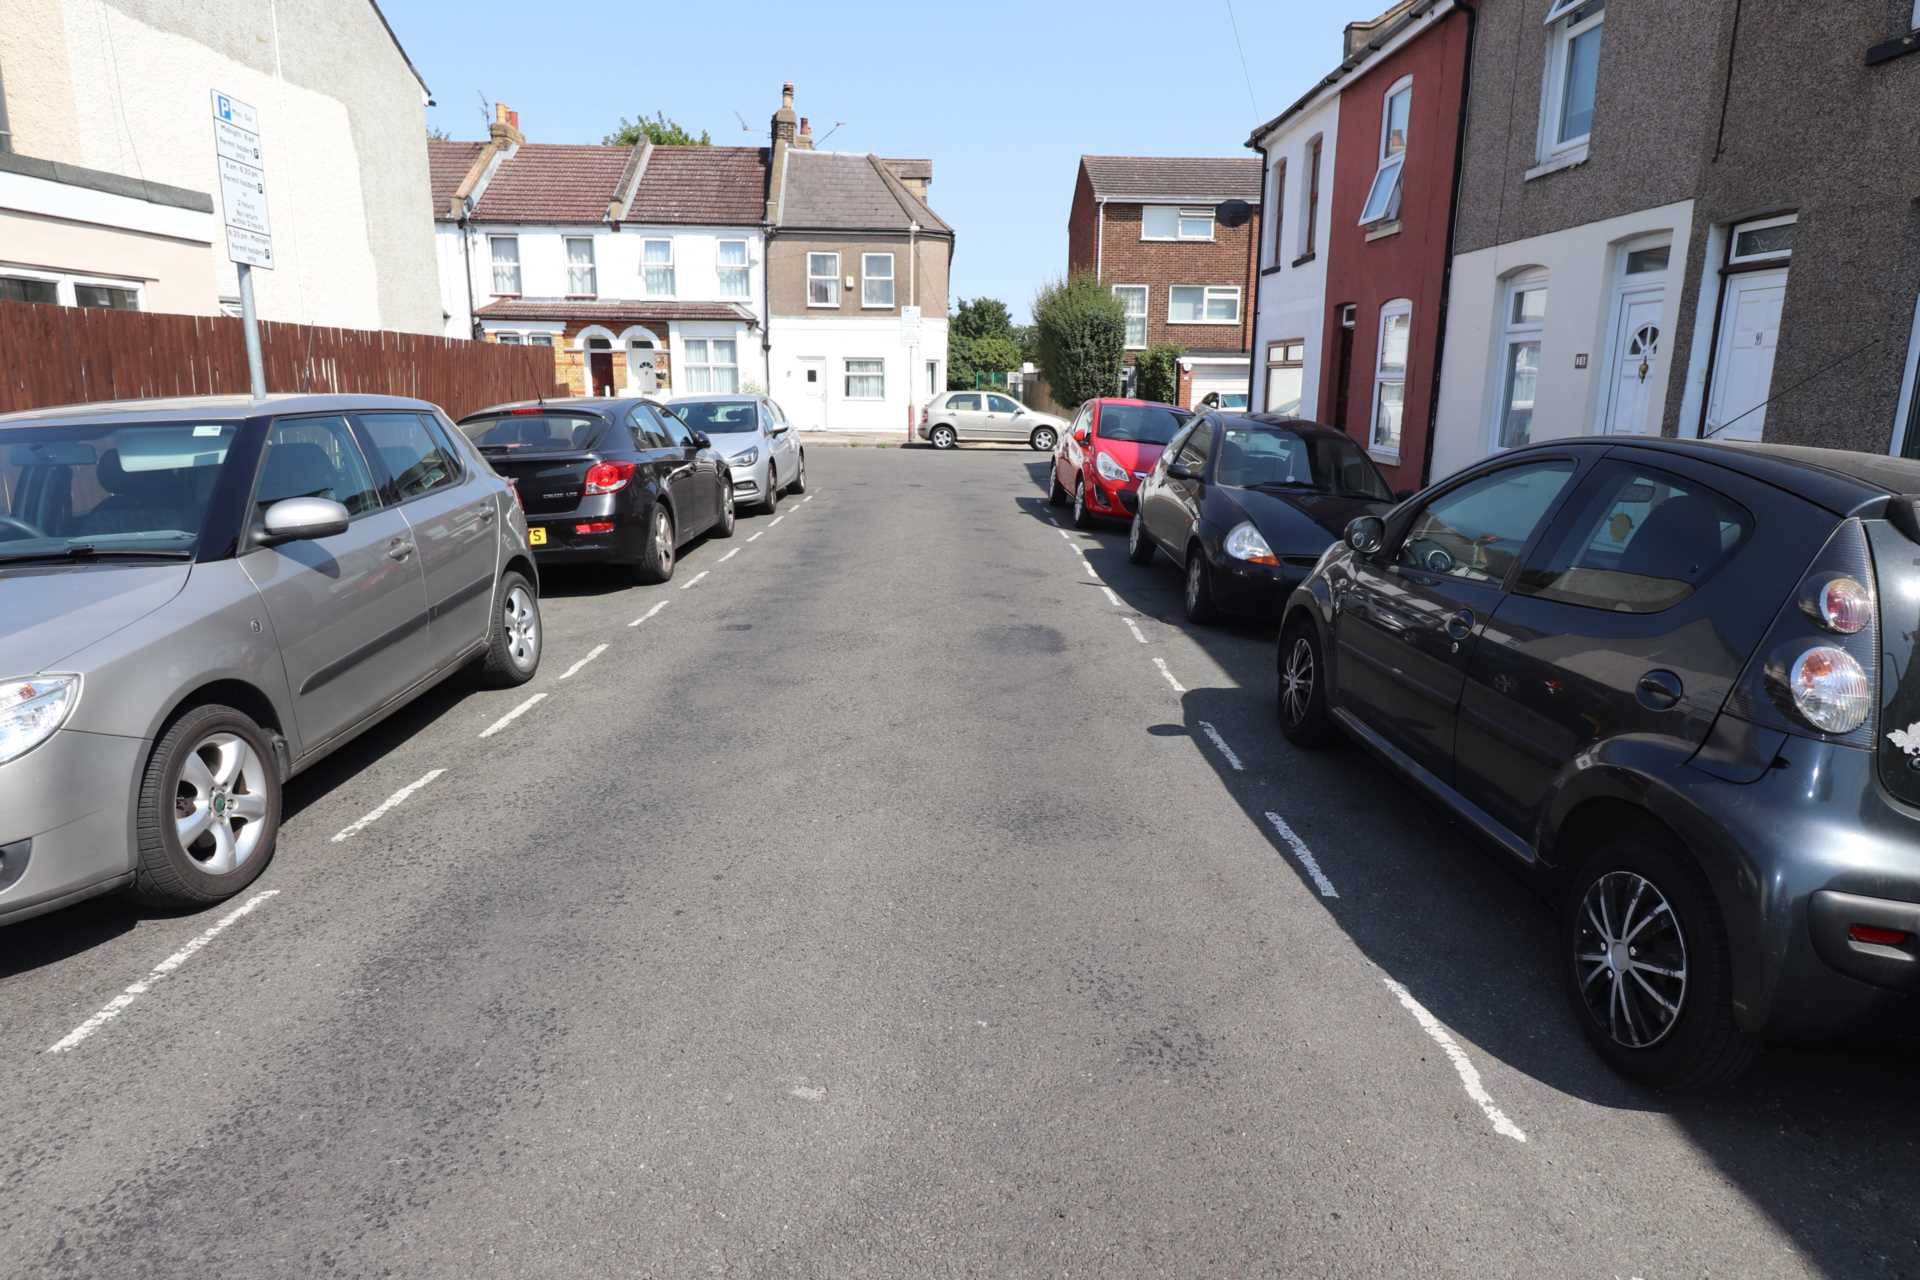 Mill Road, Gravesend, Image 15